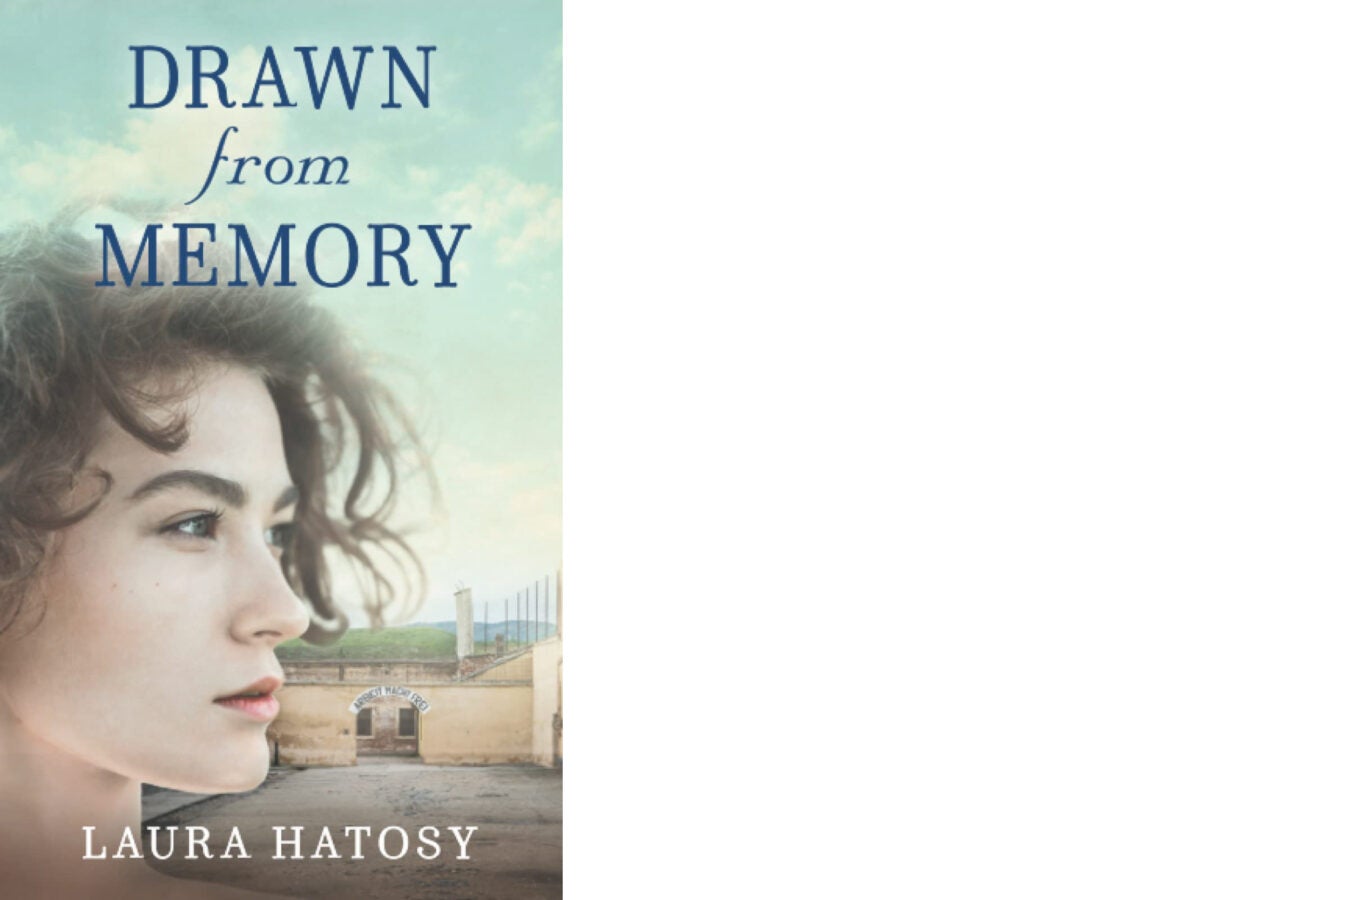 Book cover: “Drawn from Memory” by Laura Hatosy.